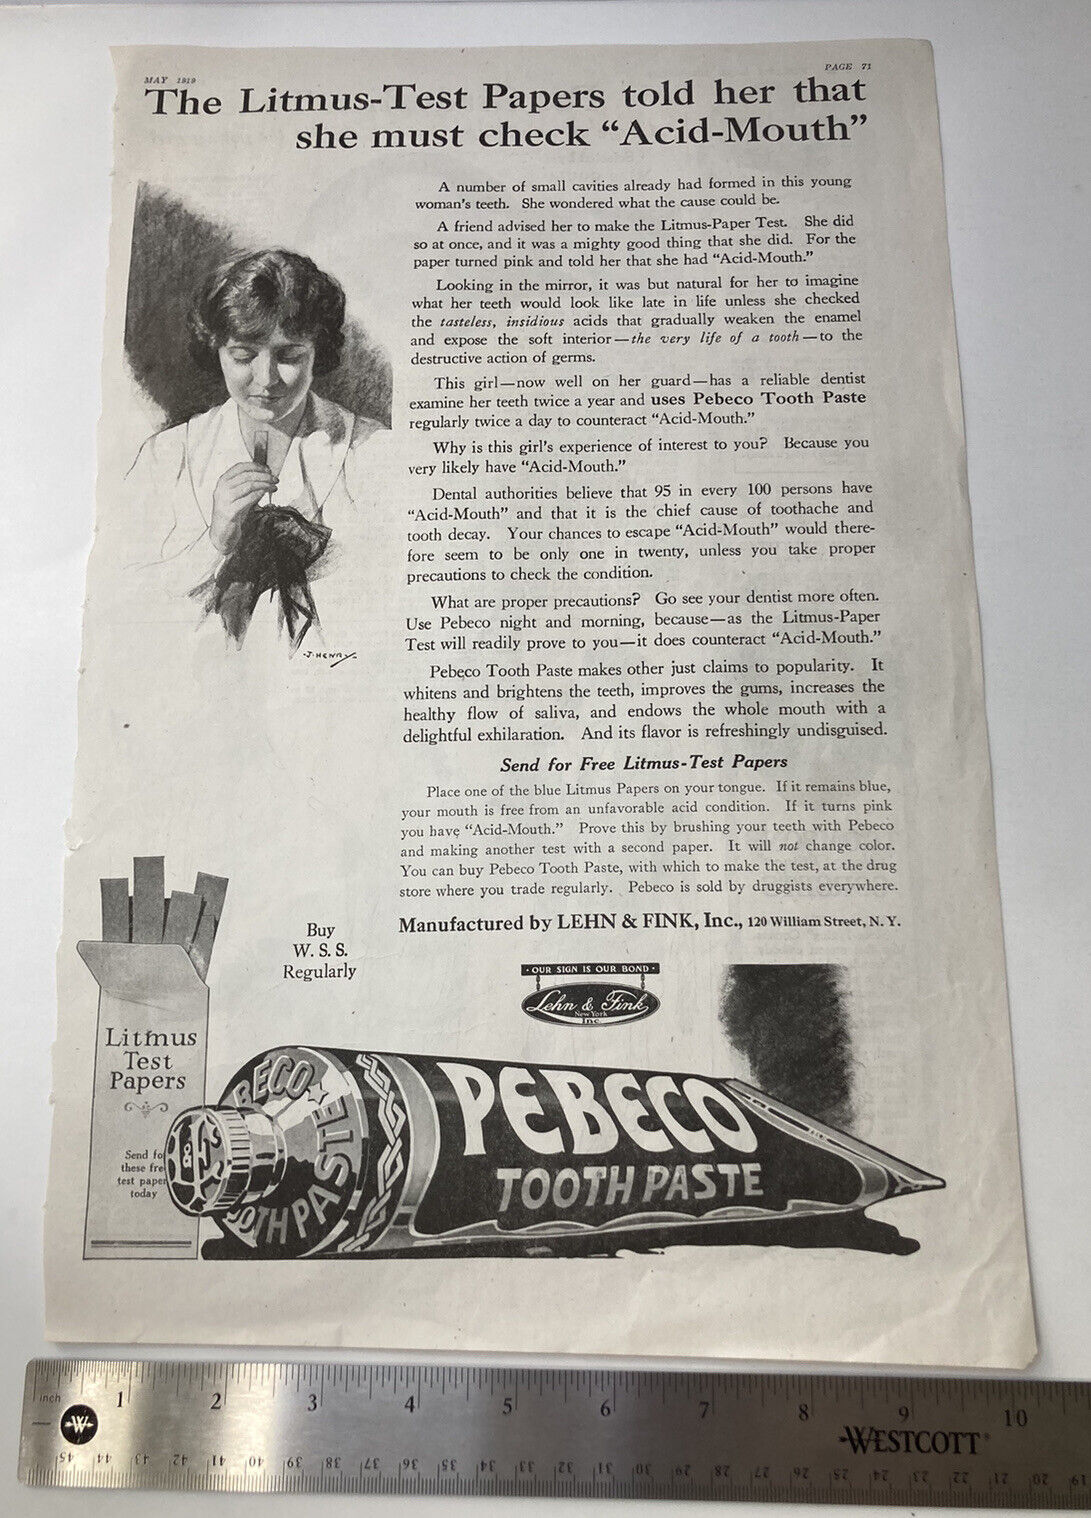 ANTIQUE 1919 Print Ad Pebeco Tooth Paste To Fight Acid-Mouth - Corsets 10x16\